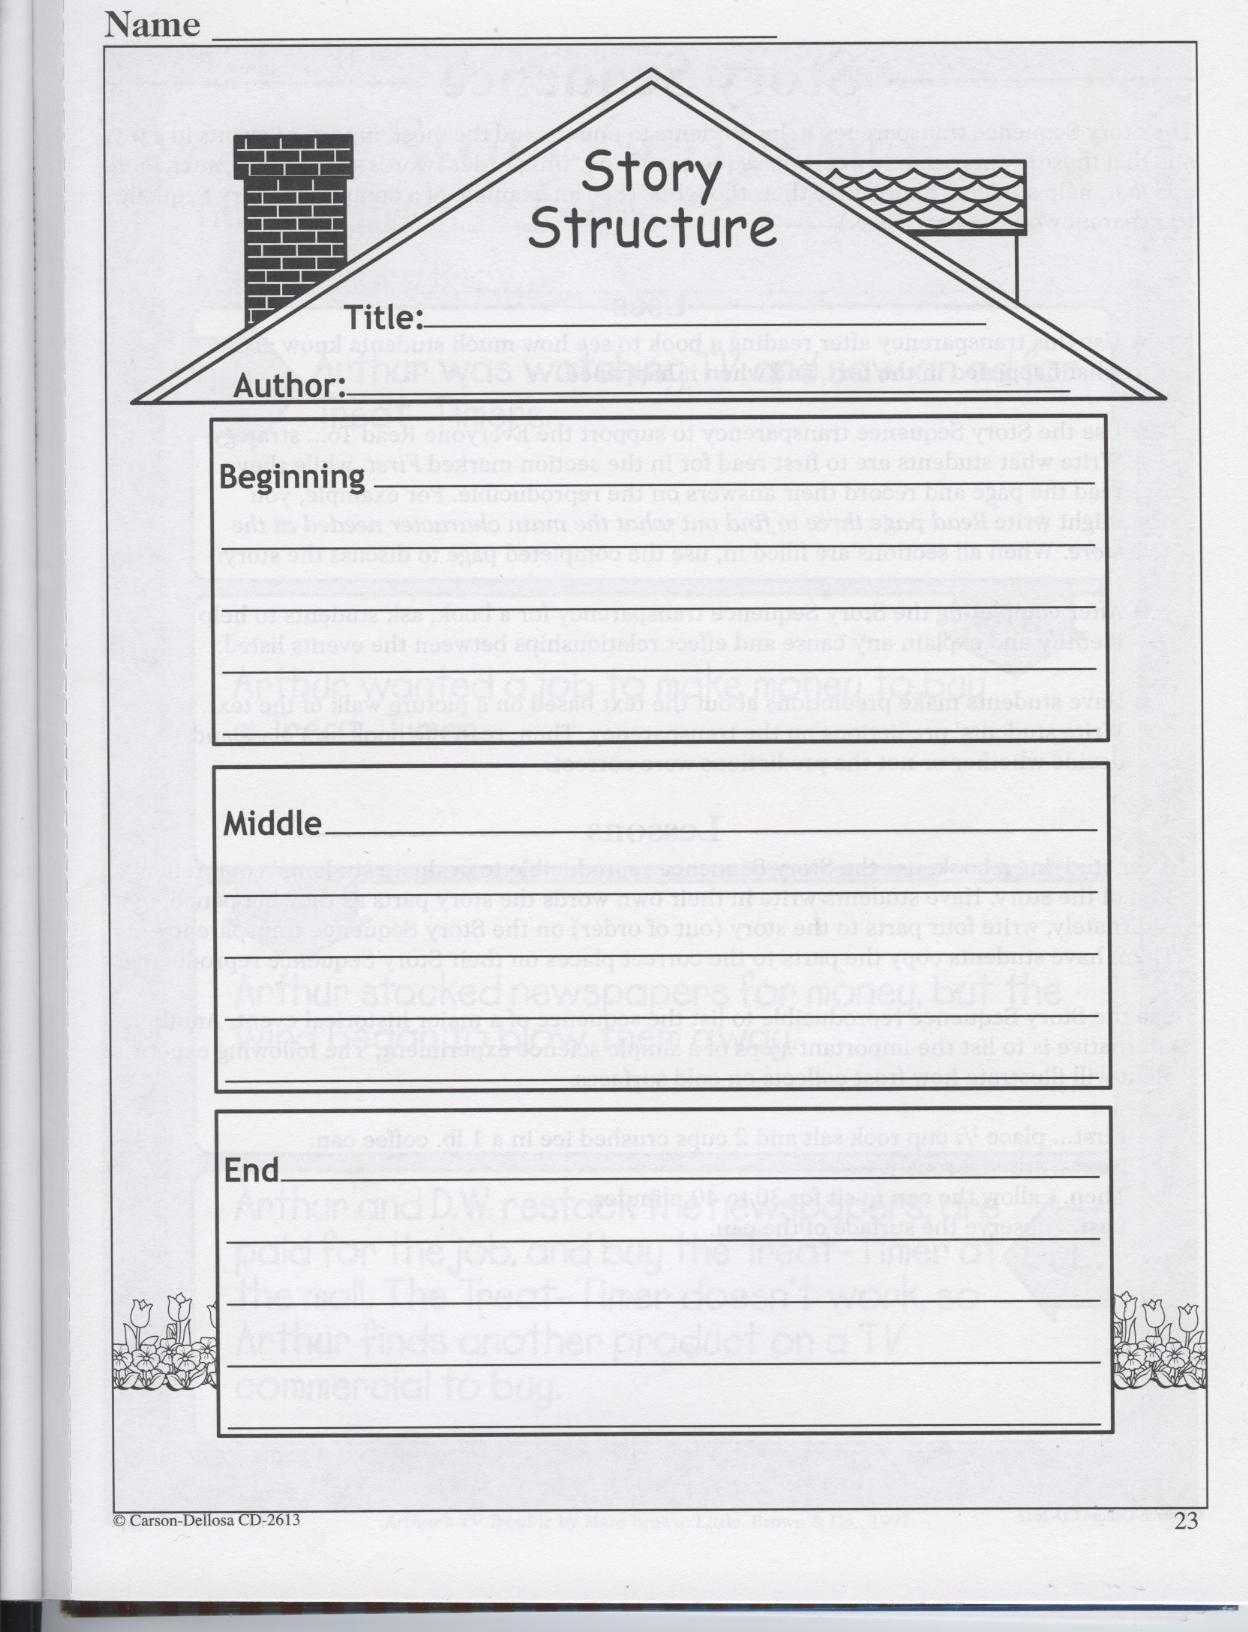 Book Report Stories ] - Book Report Template 10 Free Word Intended For Story Skeleton Book Report Template